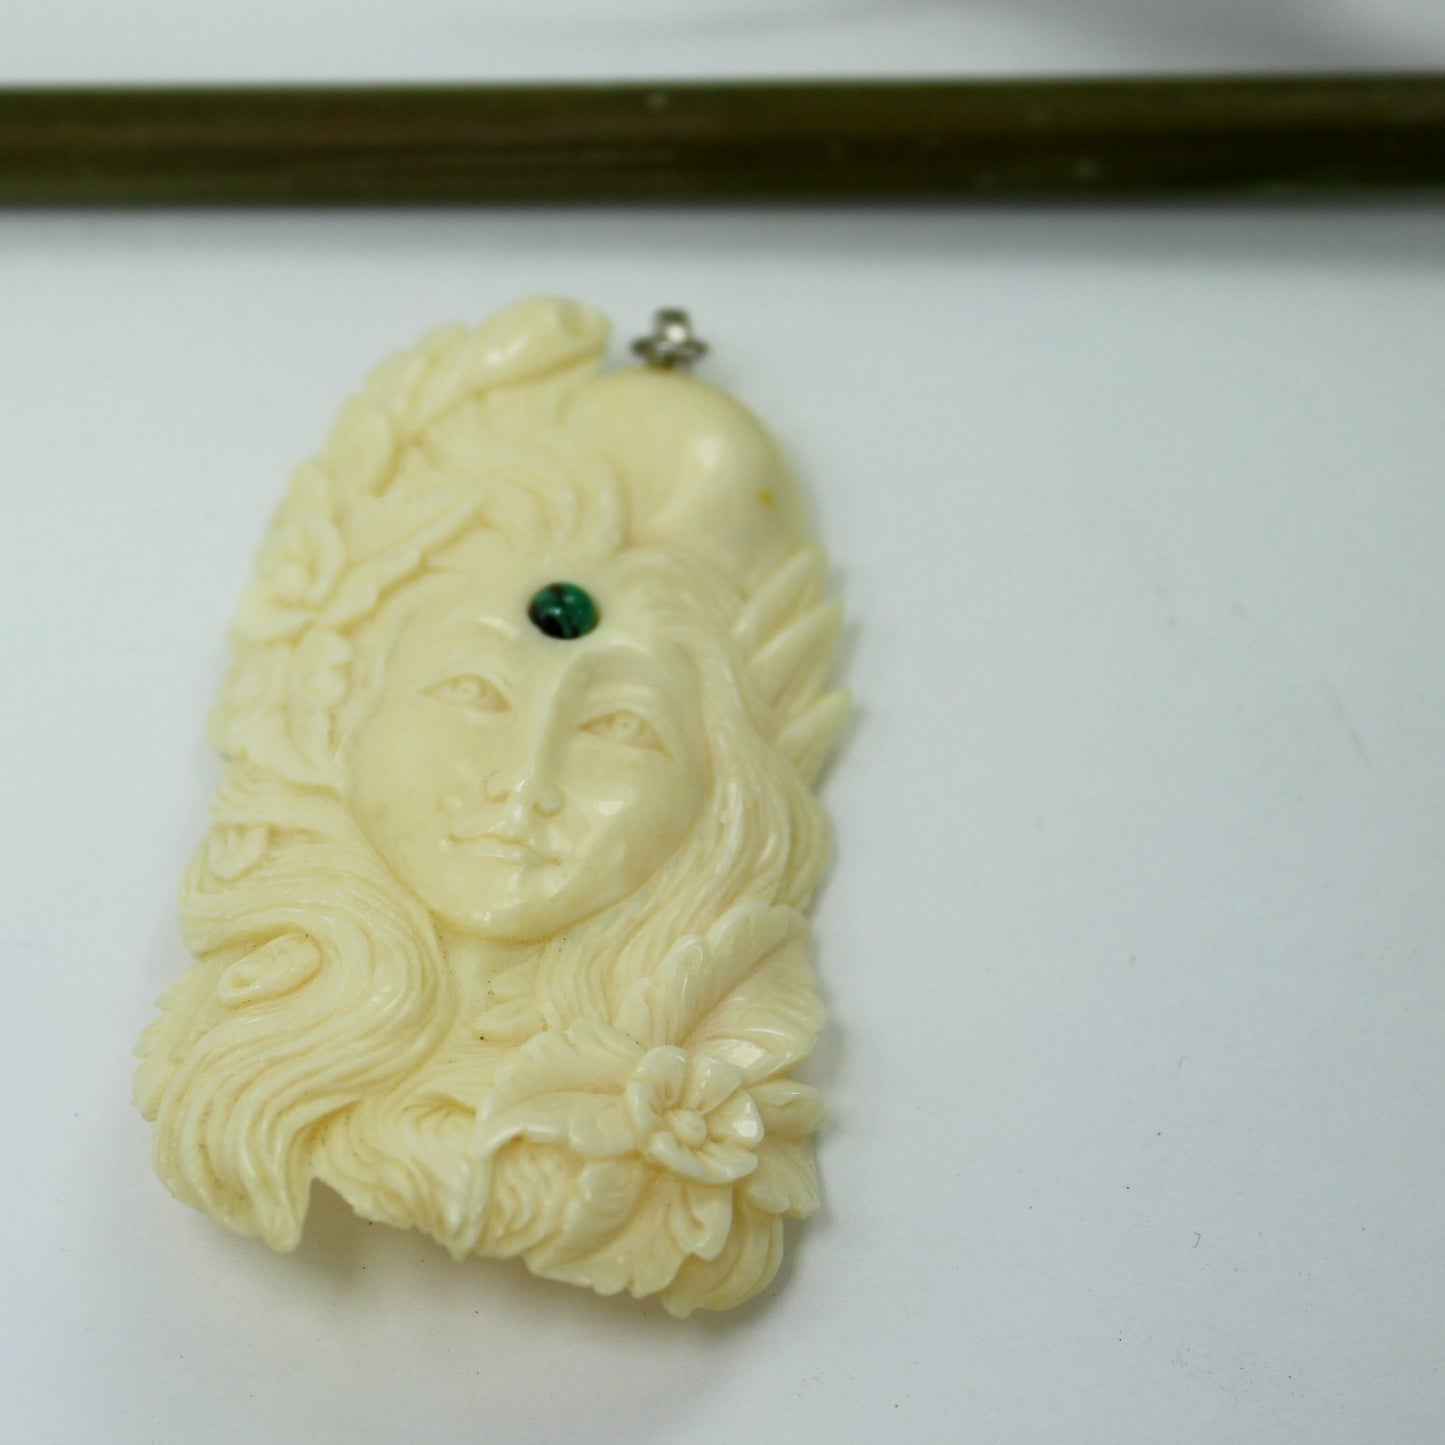 Pendant Carved Bone Lovely Face Flowers Forehead Stone 925 Bail Long 2 3/4" side face view flowers